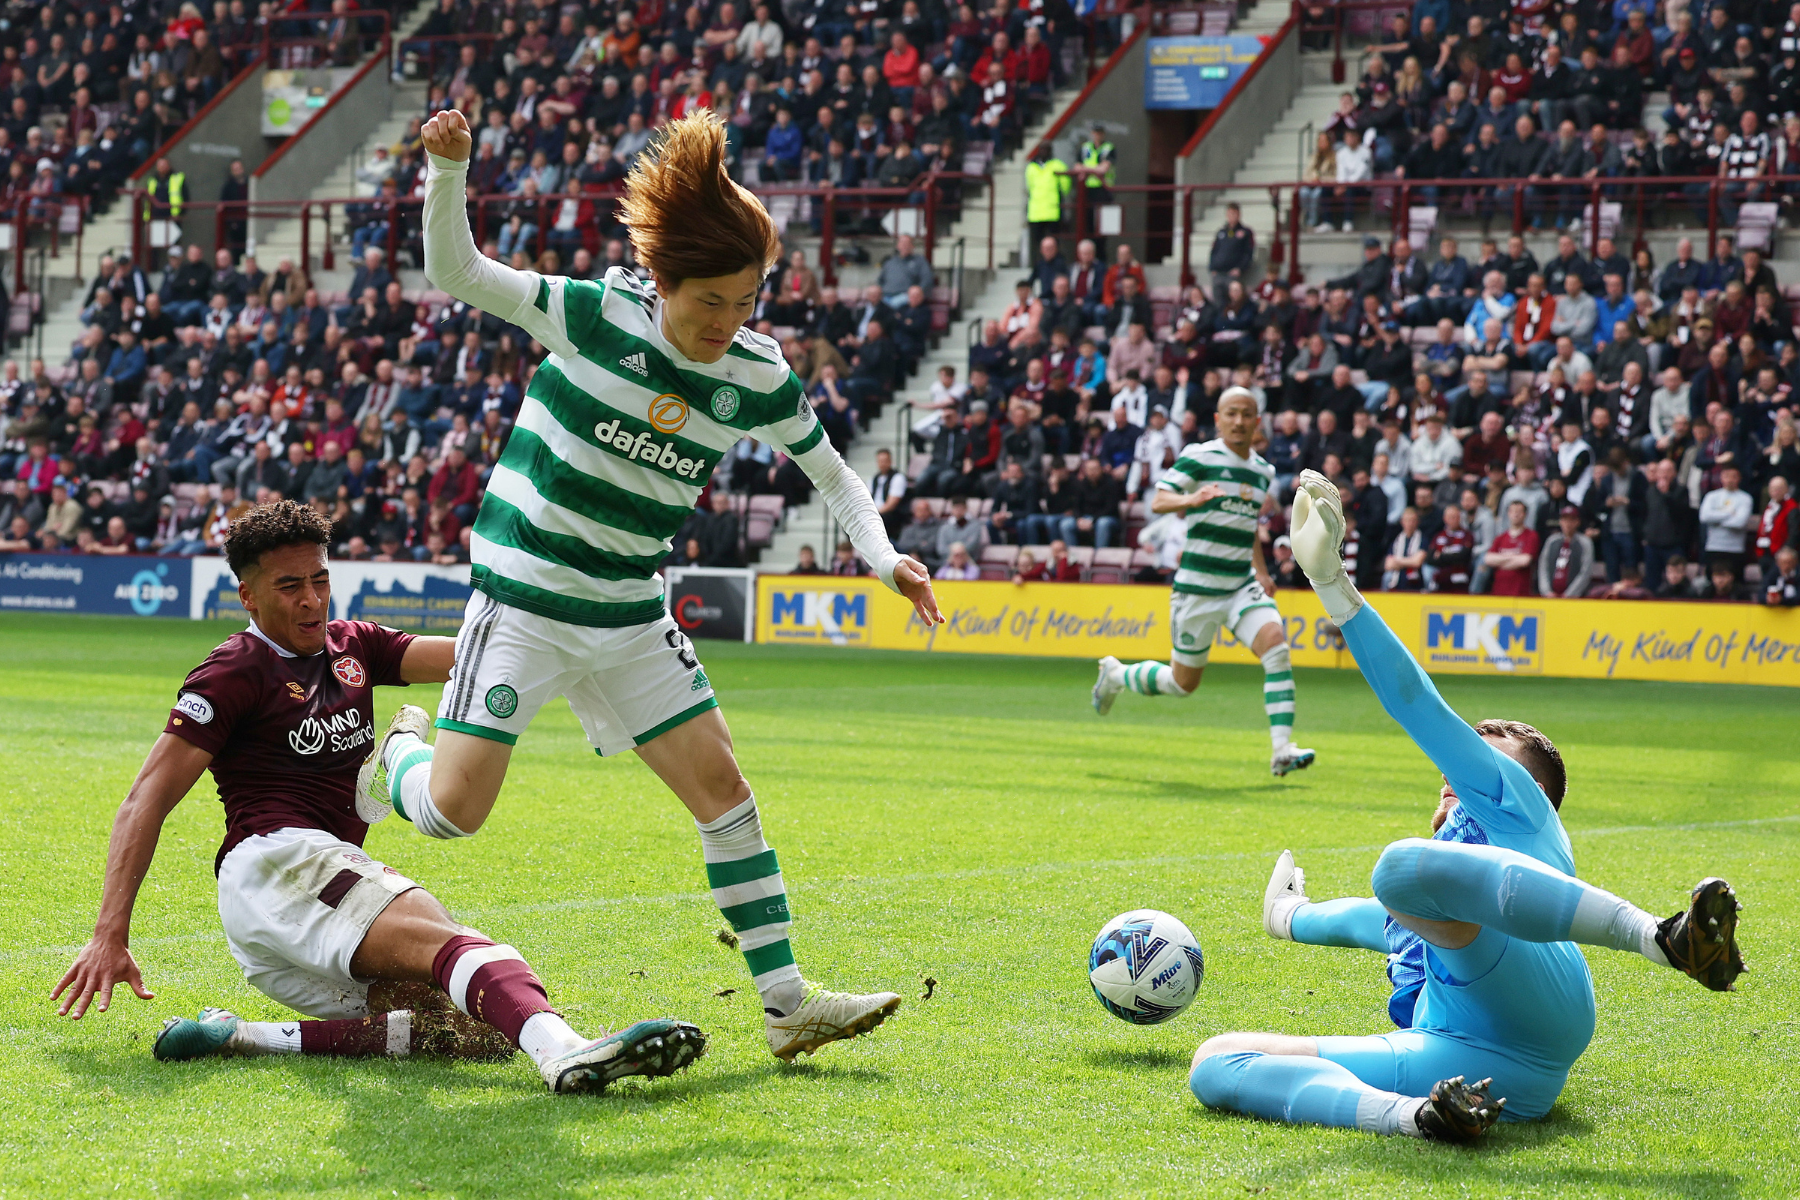 Hearts 0 Celtic 2: Instant reaction to the burning issues